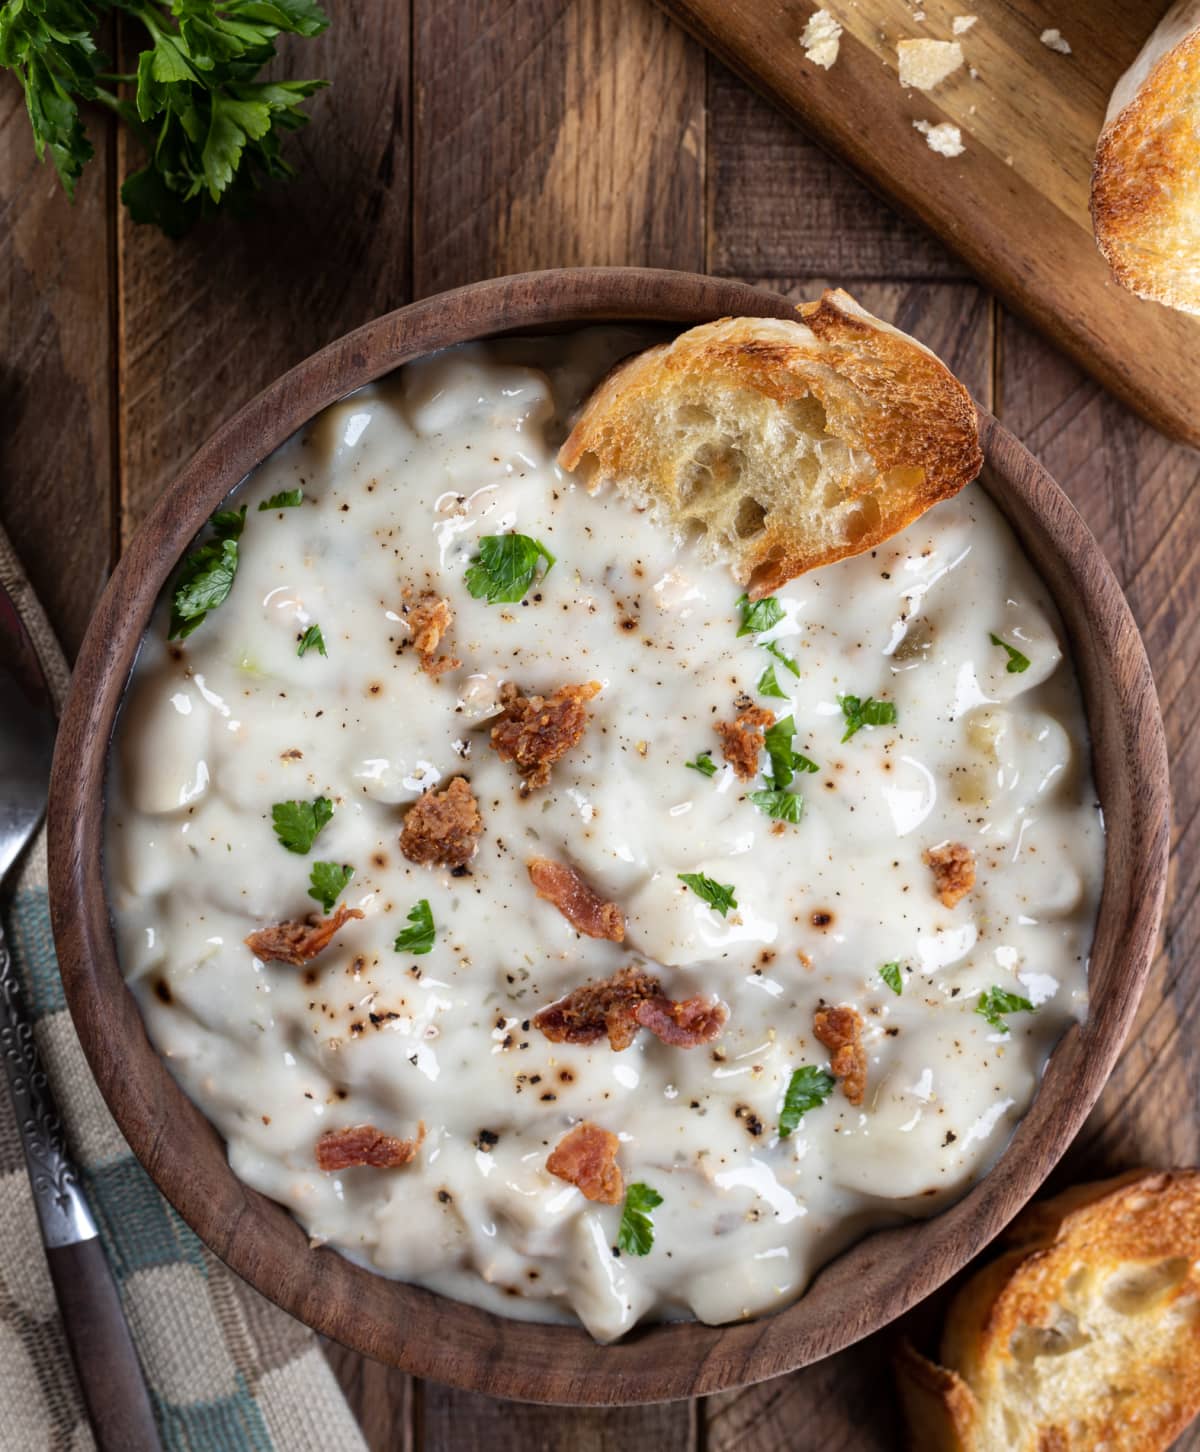 New England Style Clam Chowder with Toasted Bread- Photographed on Hasselblad H3D2-39mb Camera